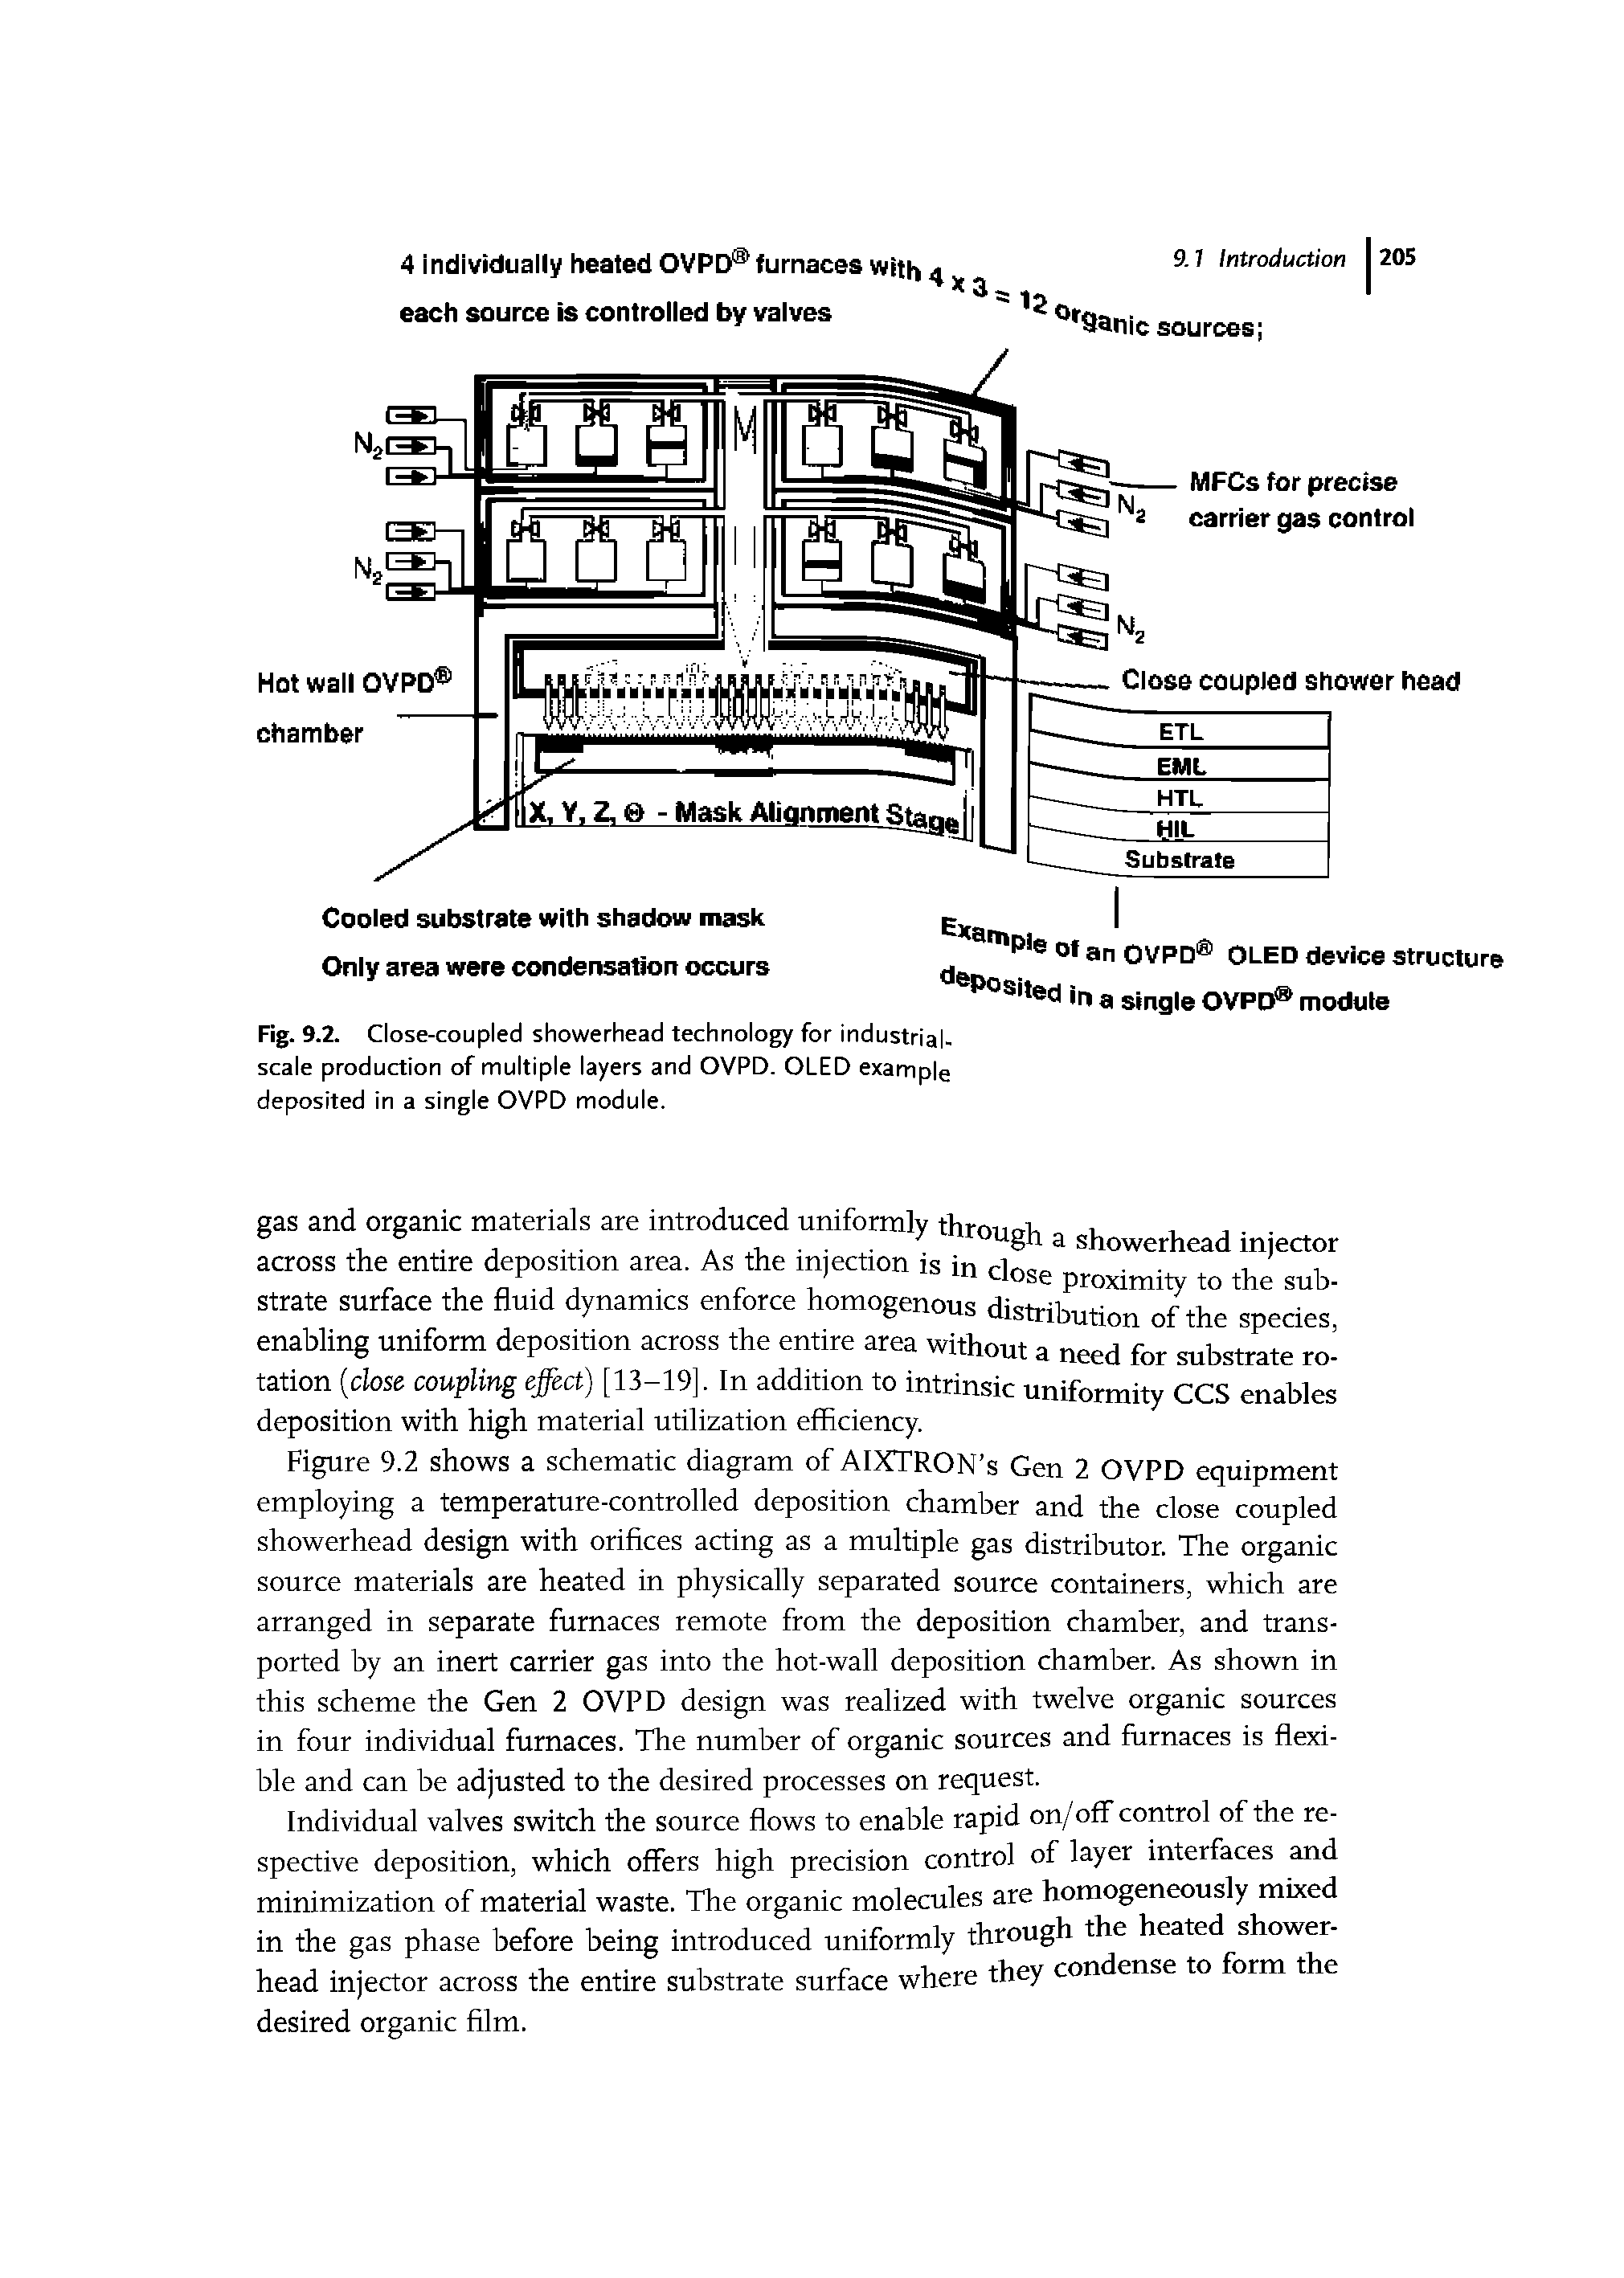 Fig. 9.2. Close-coupled showerhead technology for industrial-scale production of multiple layers and OVPD. OLED example deposited in a single OVPD module.